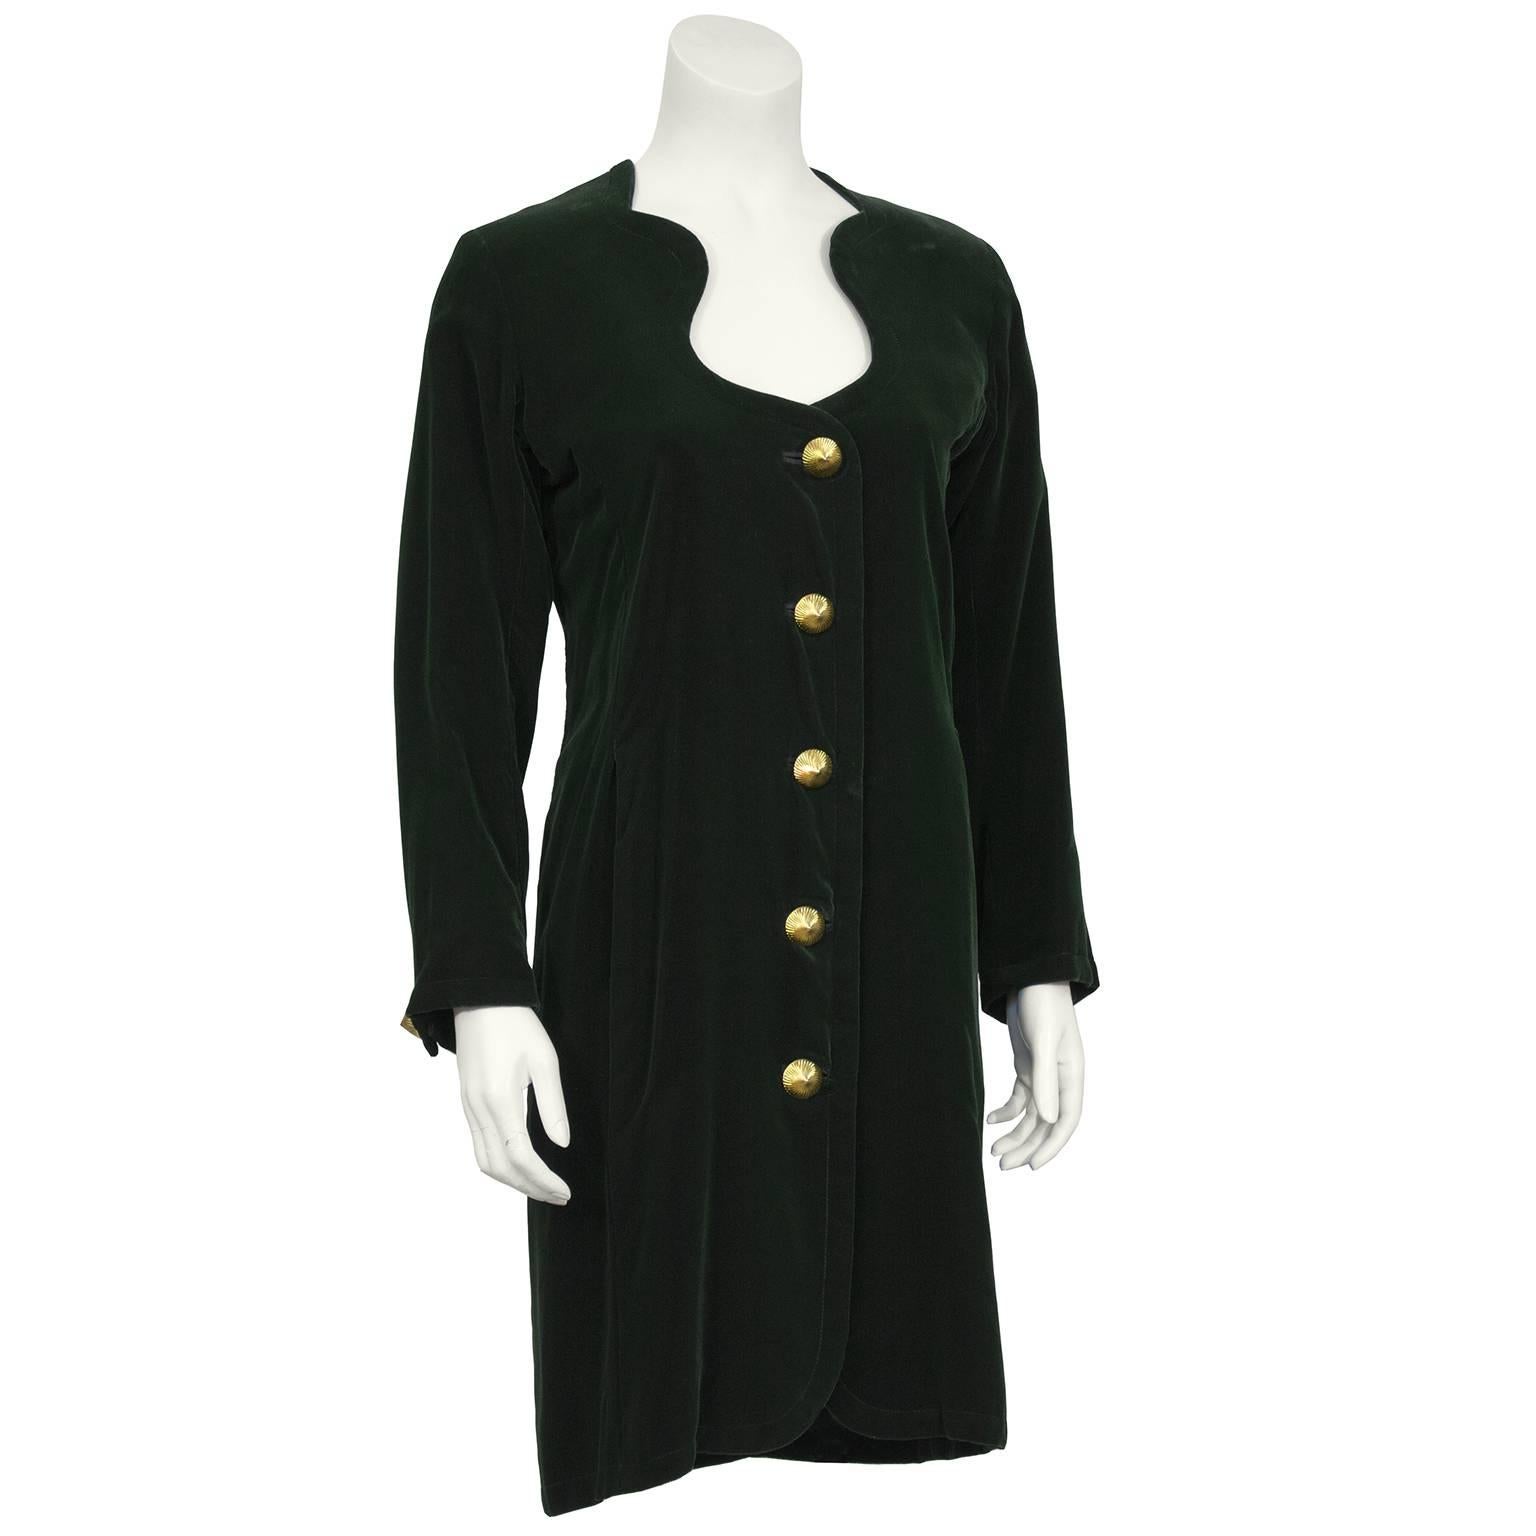 Late 1980's YSL/Yves Saint Laurent hunter green velvet fitted dress with matte gold cone shaped metal buttons up the front and and hour glass sweetheart neckline. Form fitting with seams down the front and back. Fits like a US size 6. In excellent